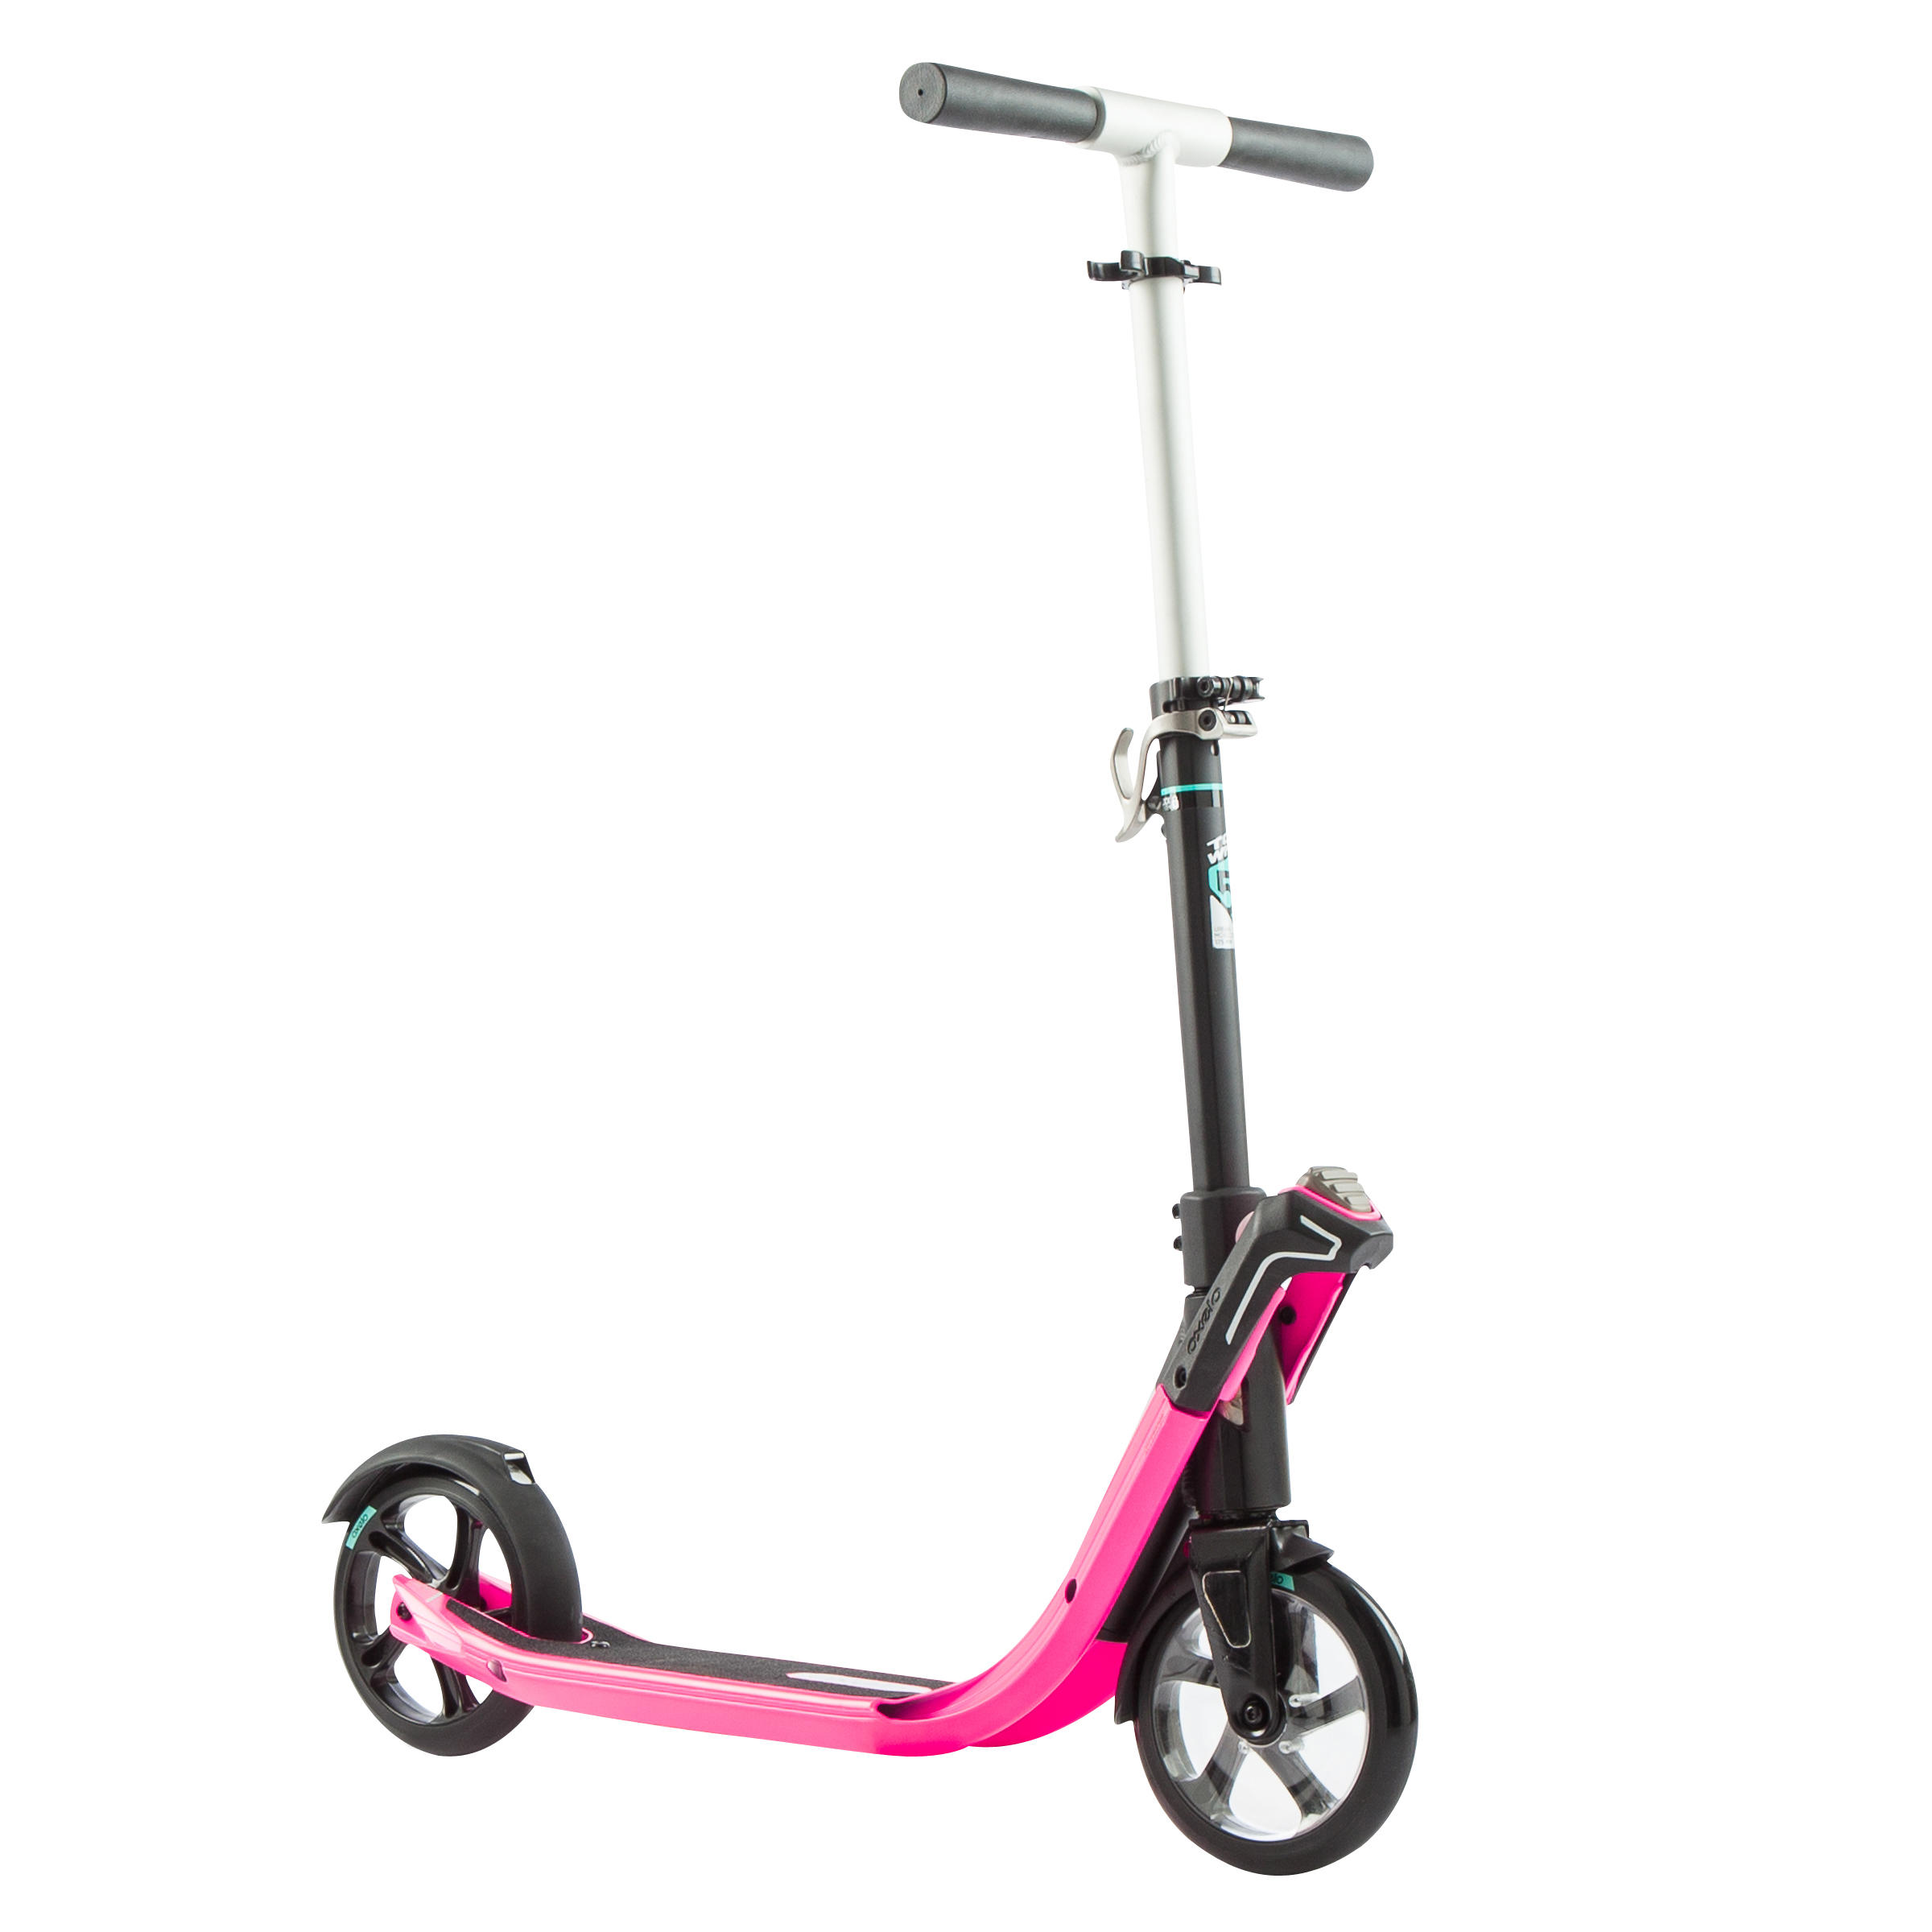 OXELO Town 5 EF 2016 Adult Scooter - Pink